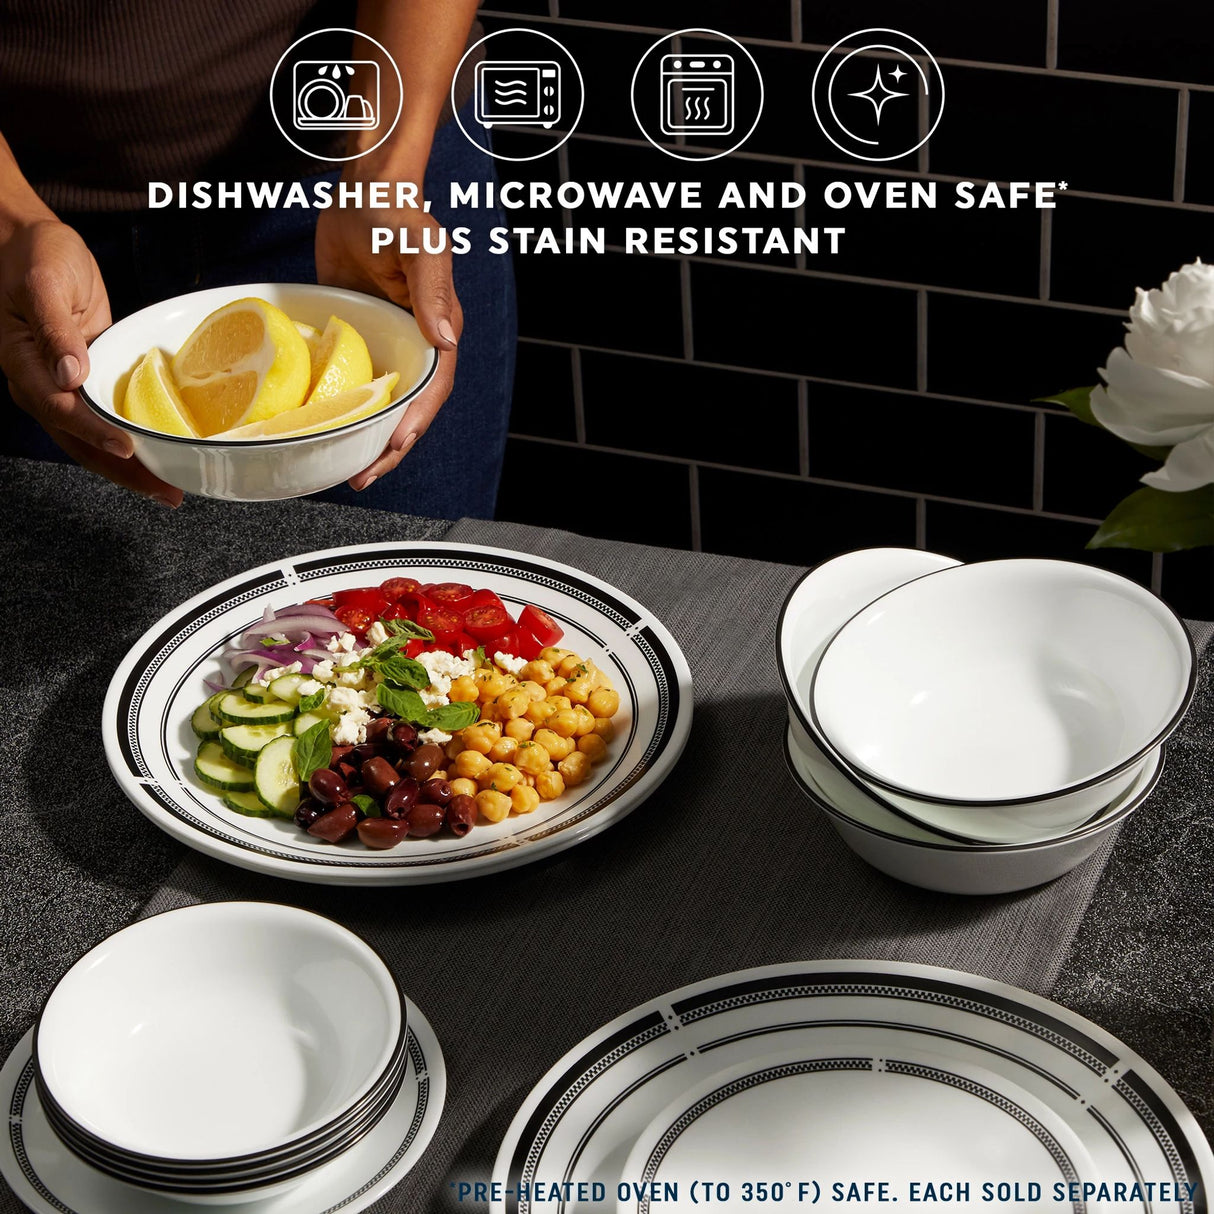  Brasserie dinnerware set on tabletop with text dishwasher, microwave and oven safe plus stain resistant